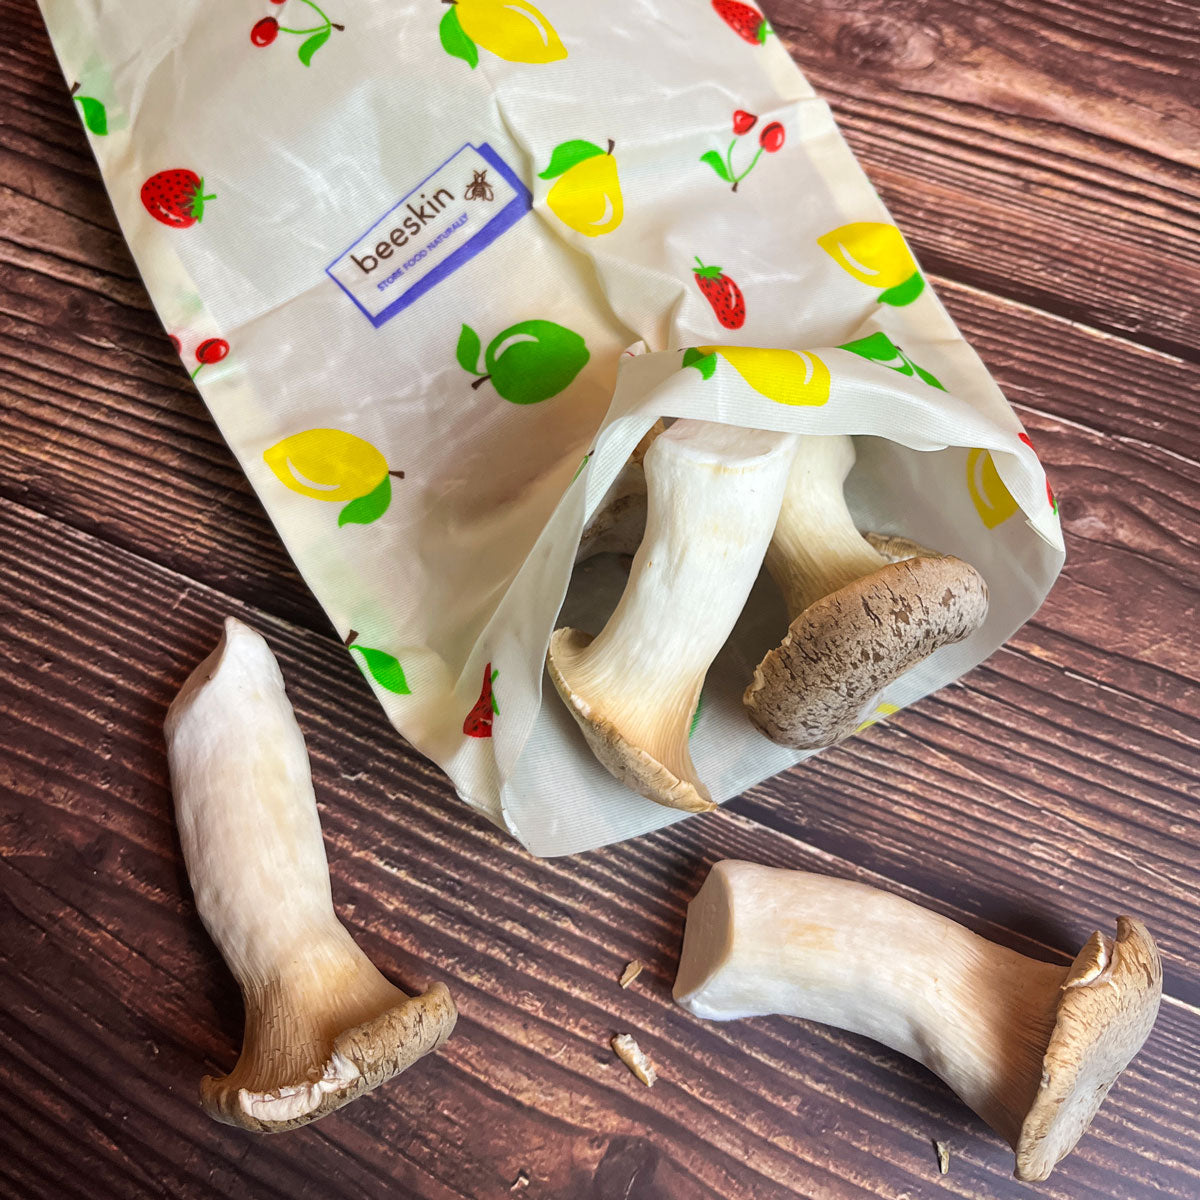 mushrooms in beeswax bag size s fruit design on a wooden table